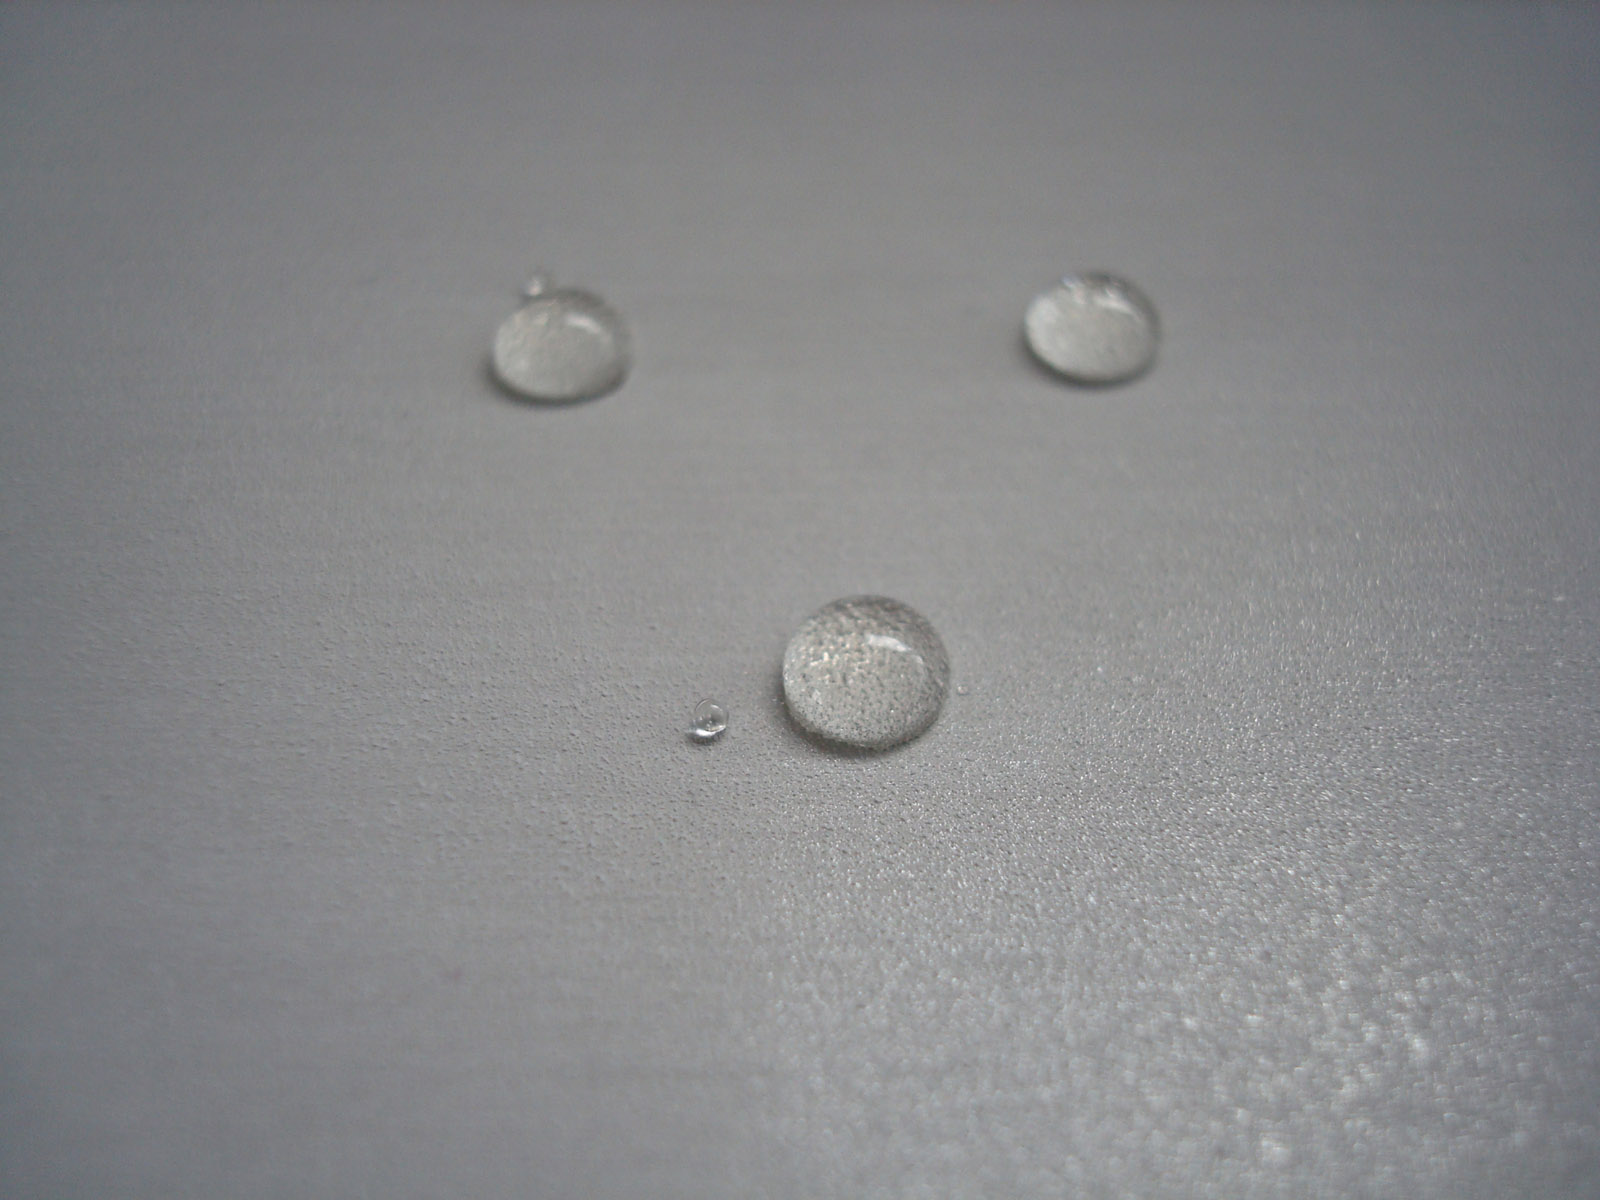 Drops of oil on a super hydrophobic and oleophobic coating on stainless steel.